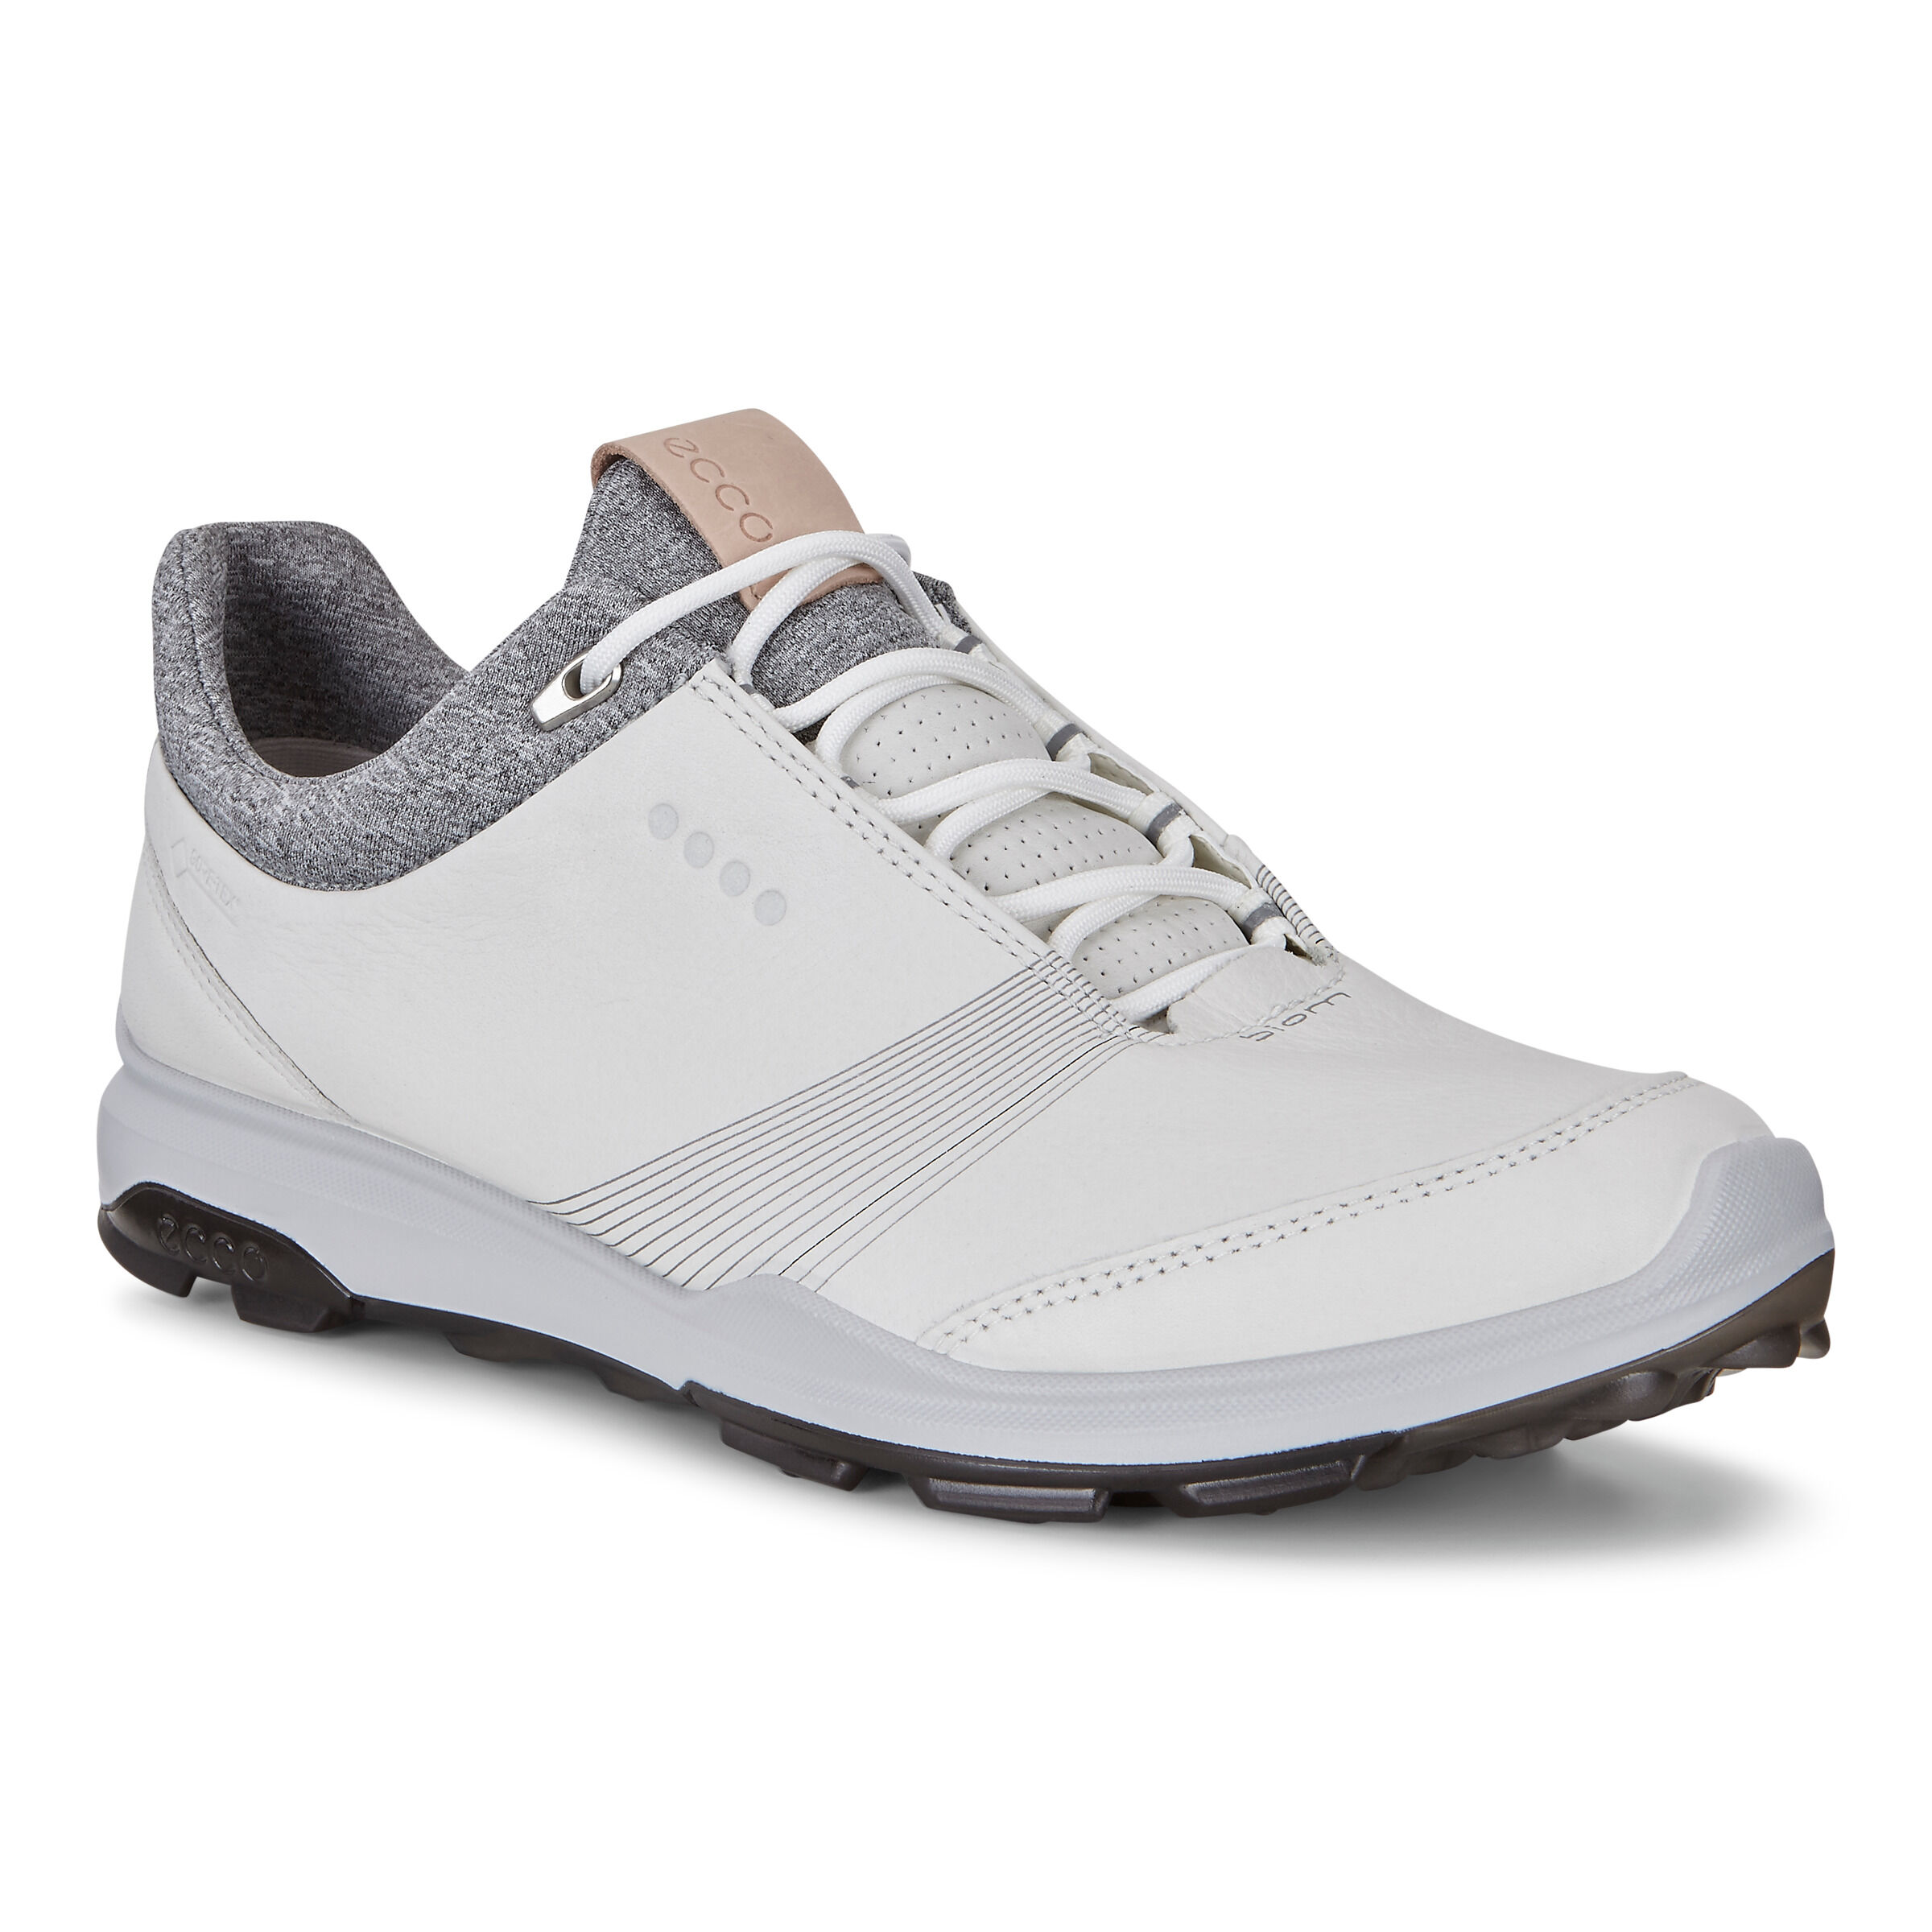 size 8.5 ecco womens golf shoes